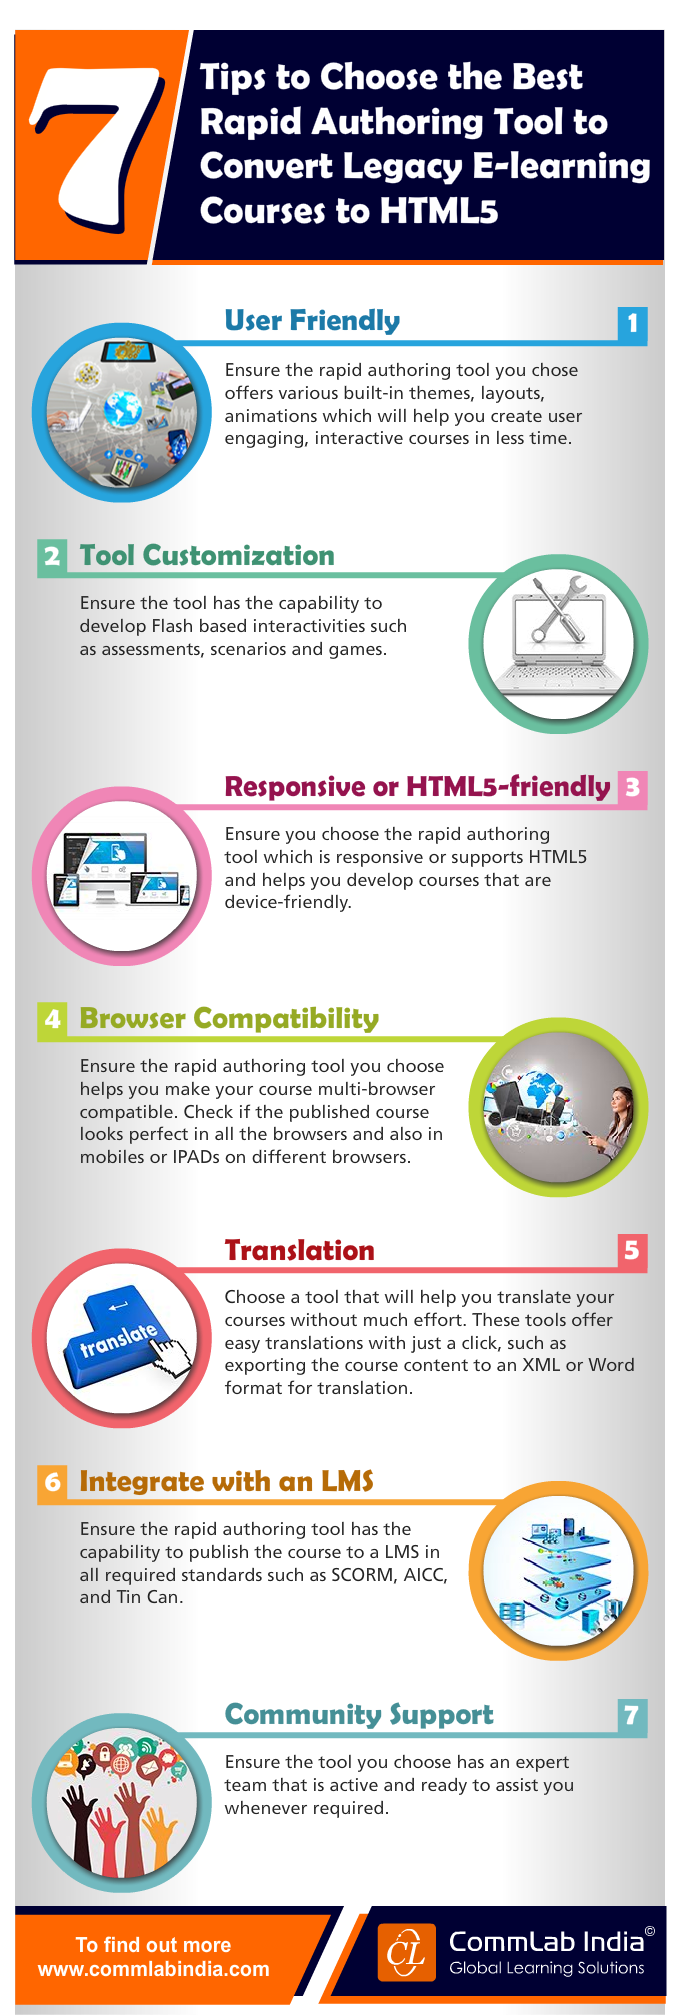 7 Tips to Choose the Best Authoring Tool for HTML5 Conversions [Infographic]